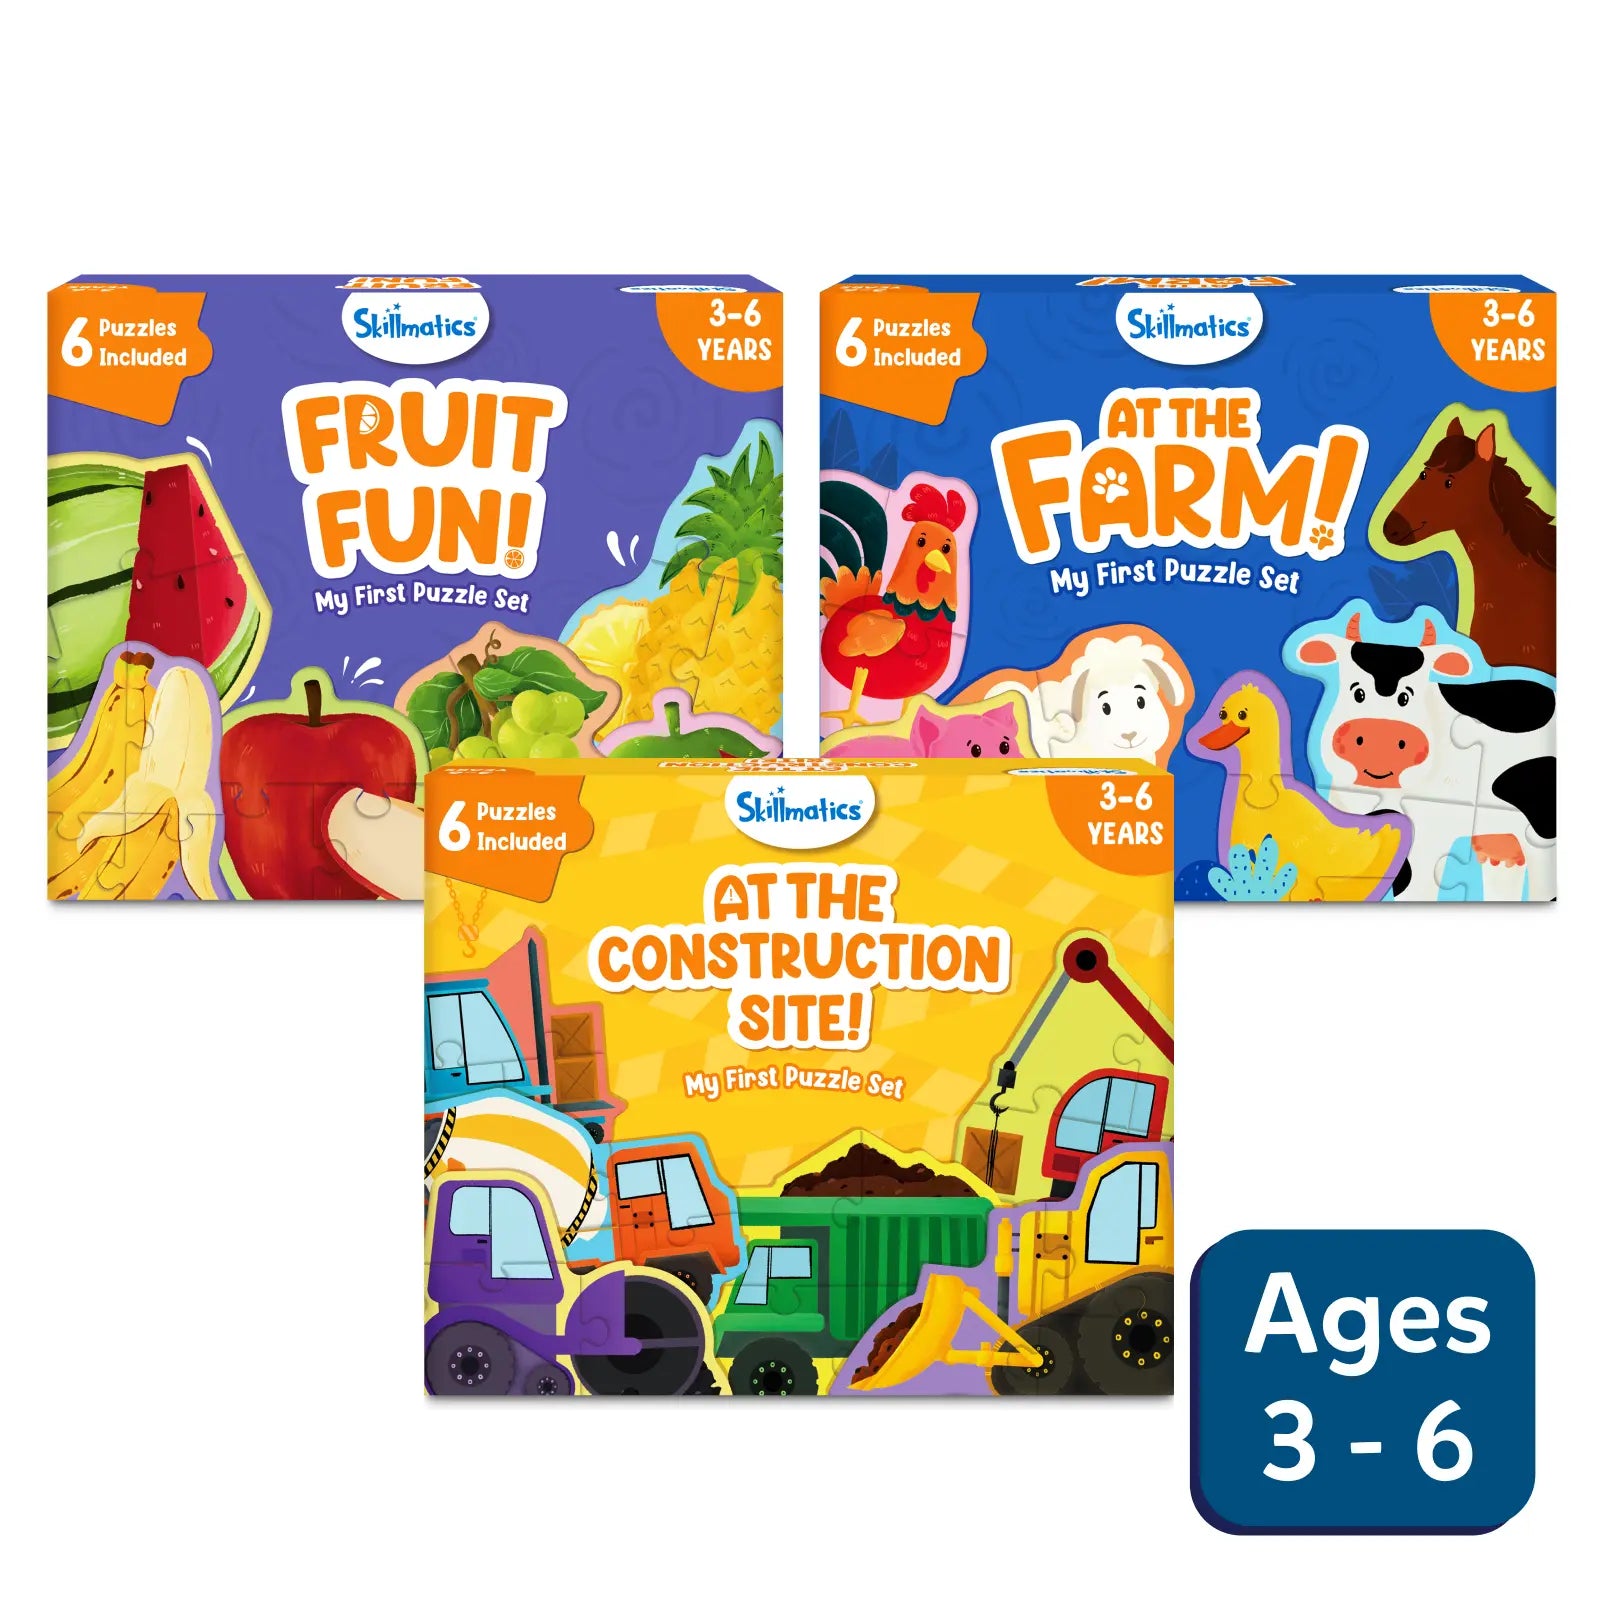 My First Puzzle Set: Mega Combo (ages 3-6)